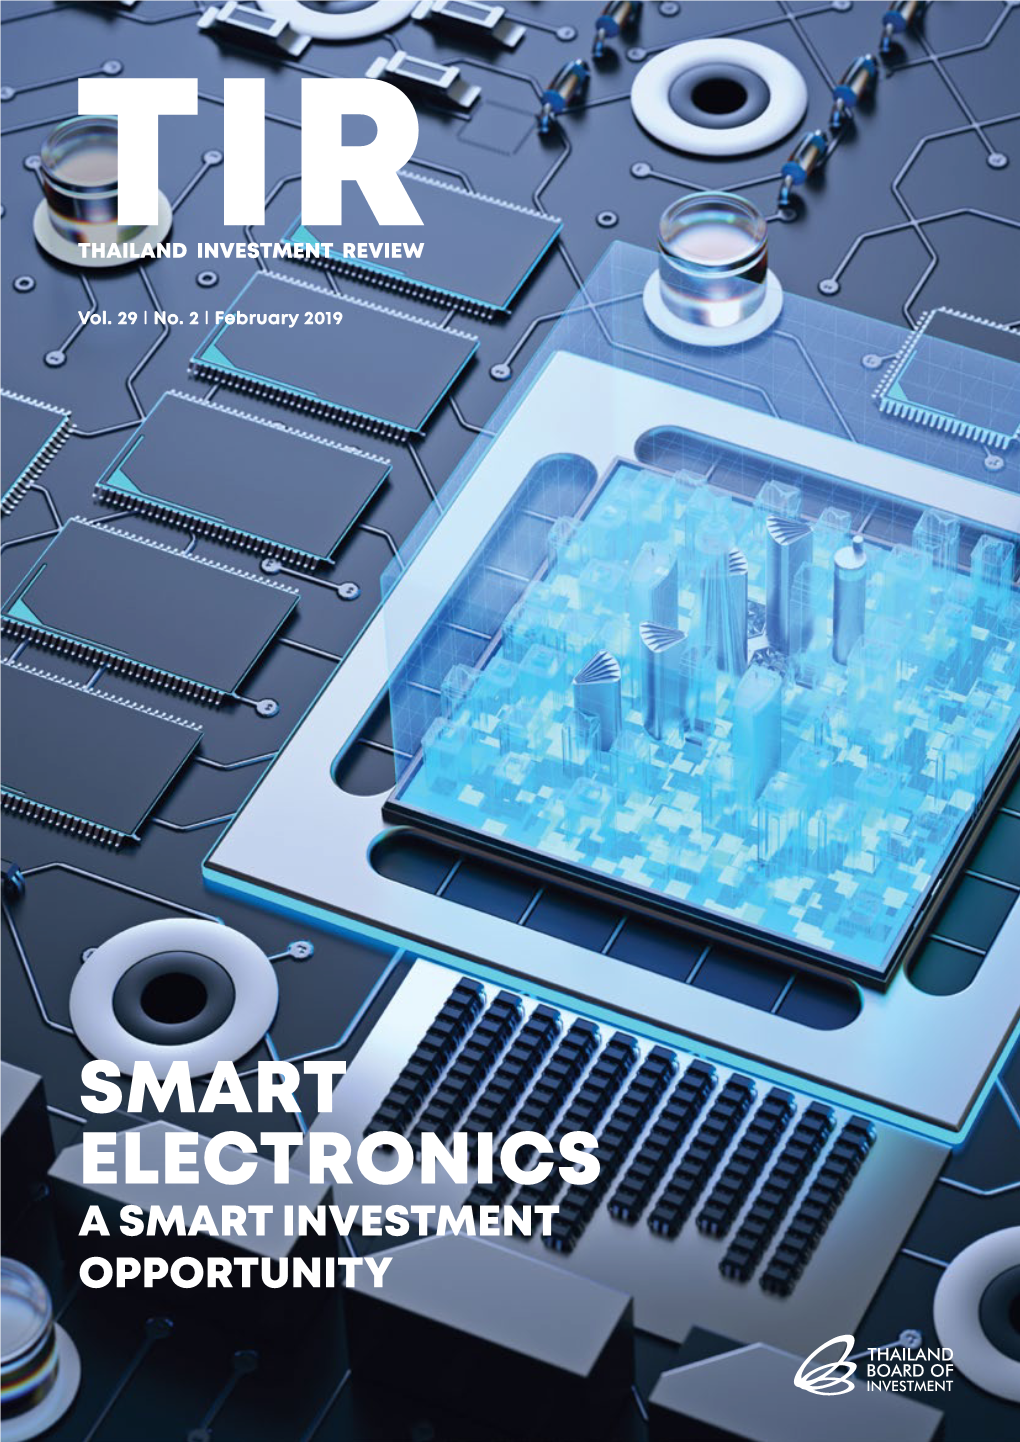 SMART ELECTRONICS, a Smart Investment Opportunity